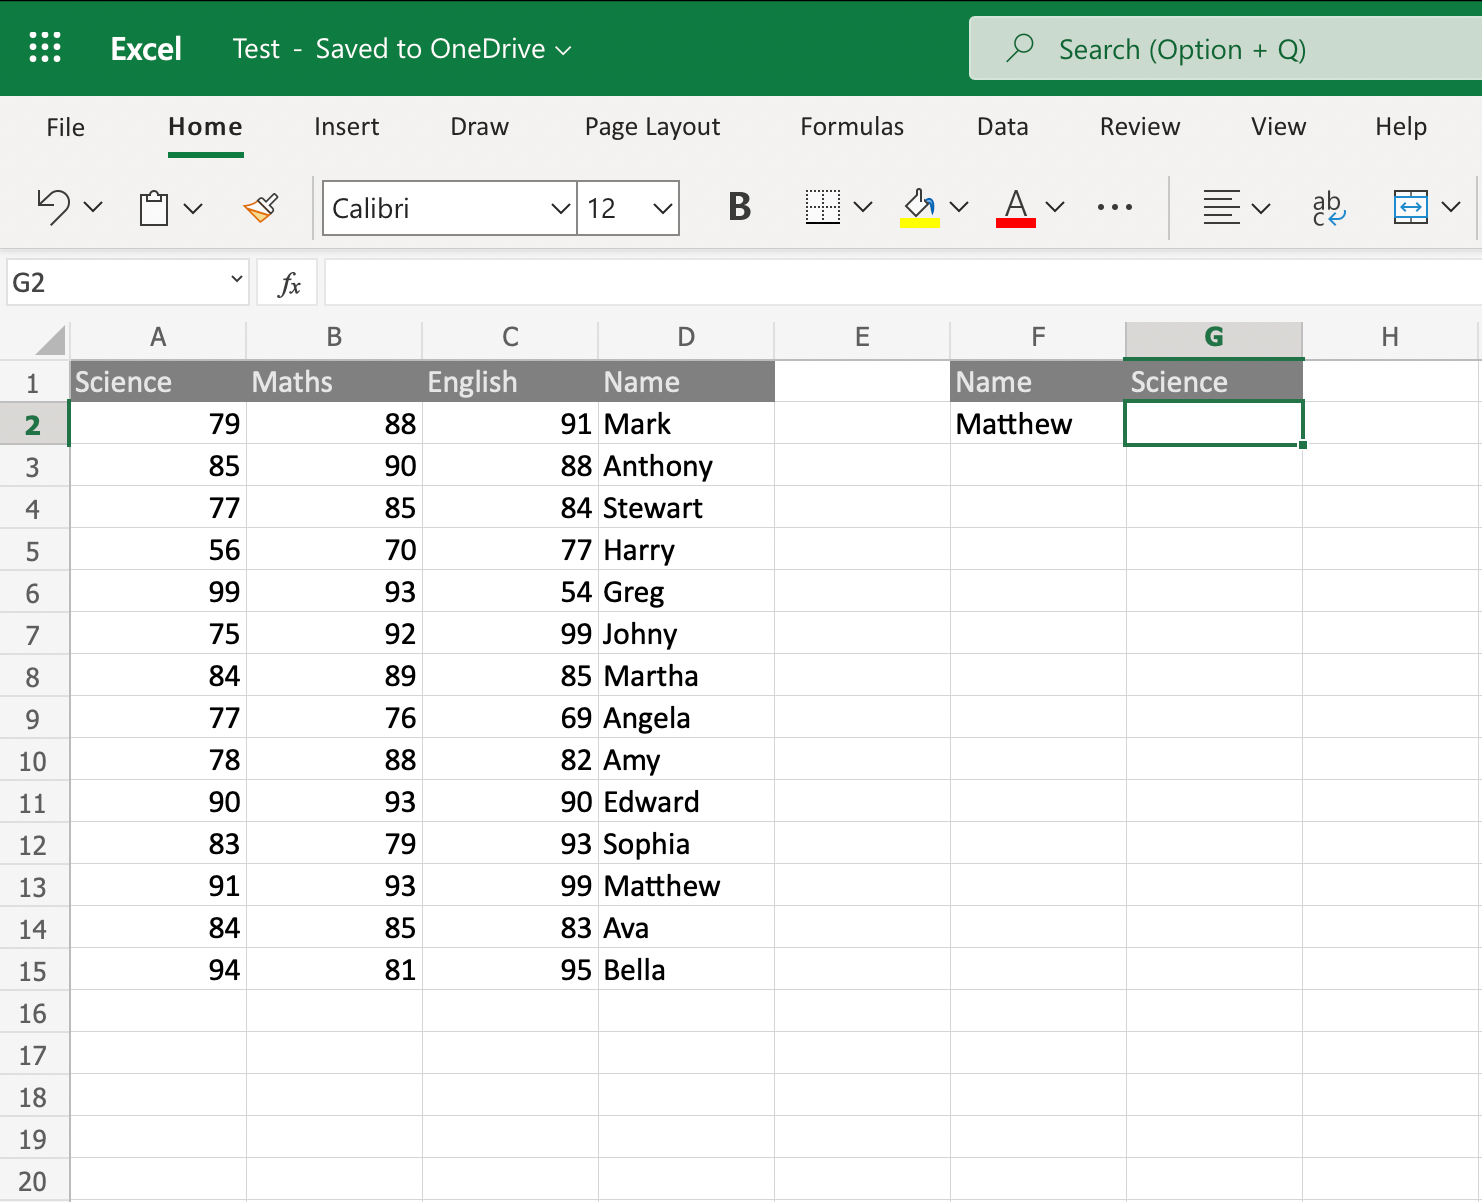 Excel spreadsheet with example data